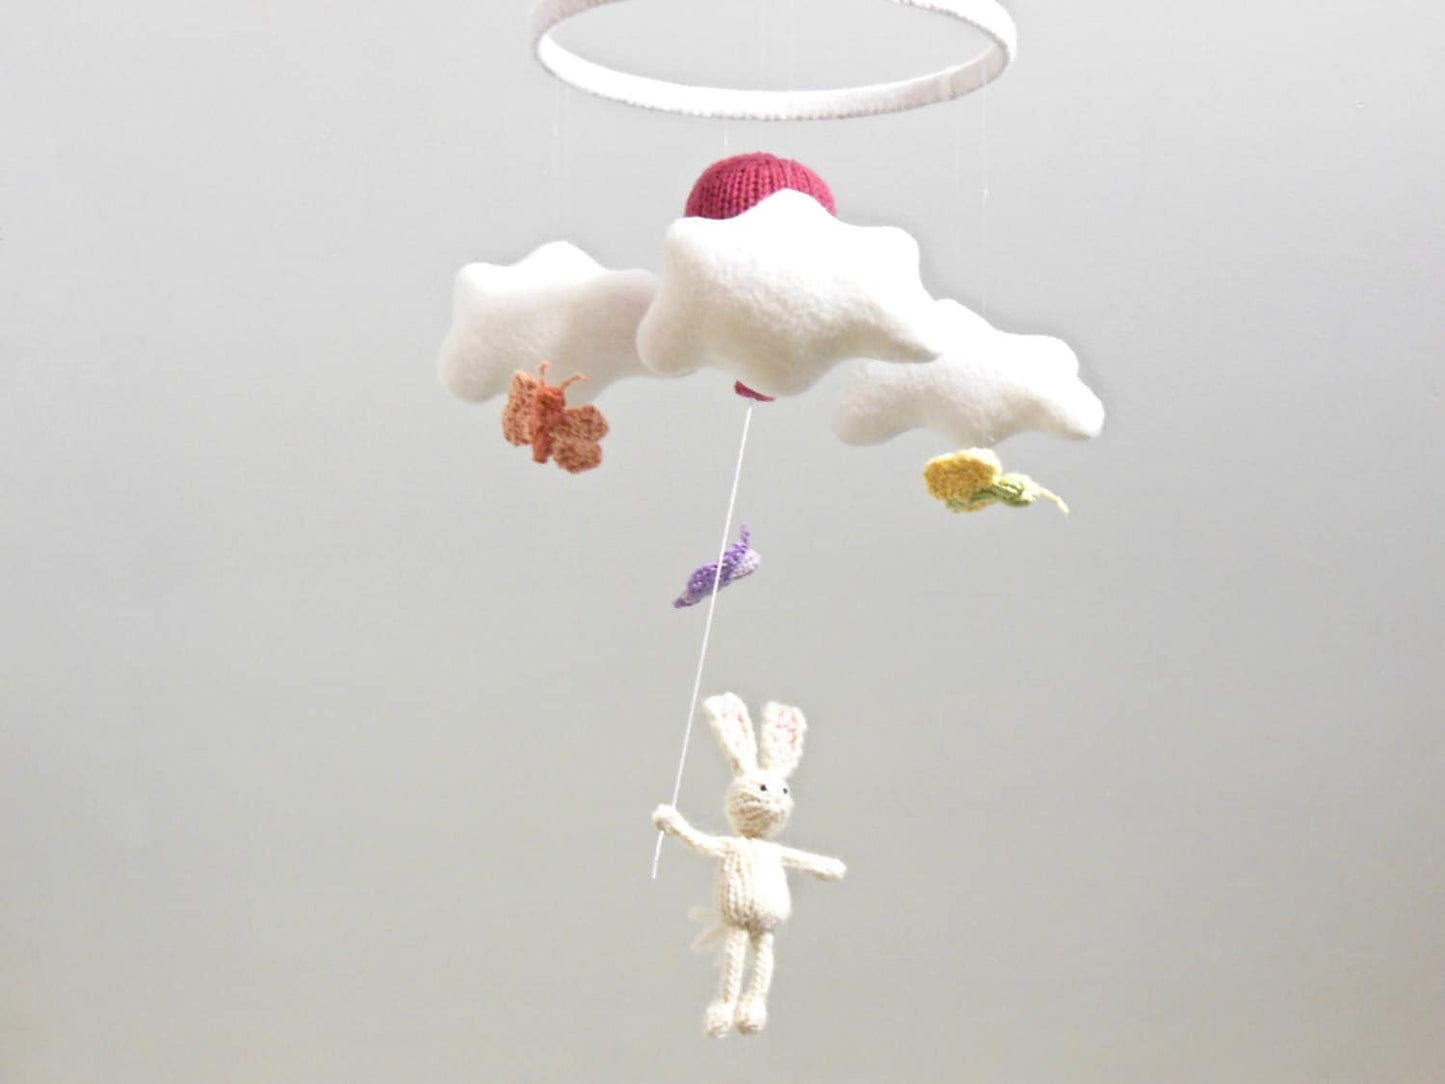 White Knit Bunny Holding Balloon with Butterflies Mobile